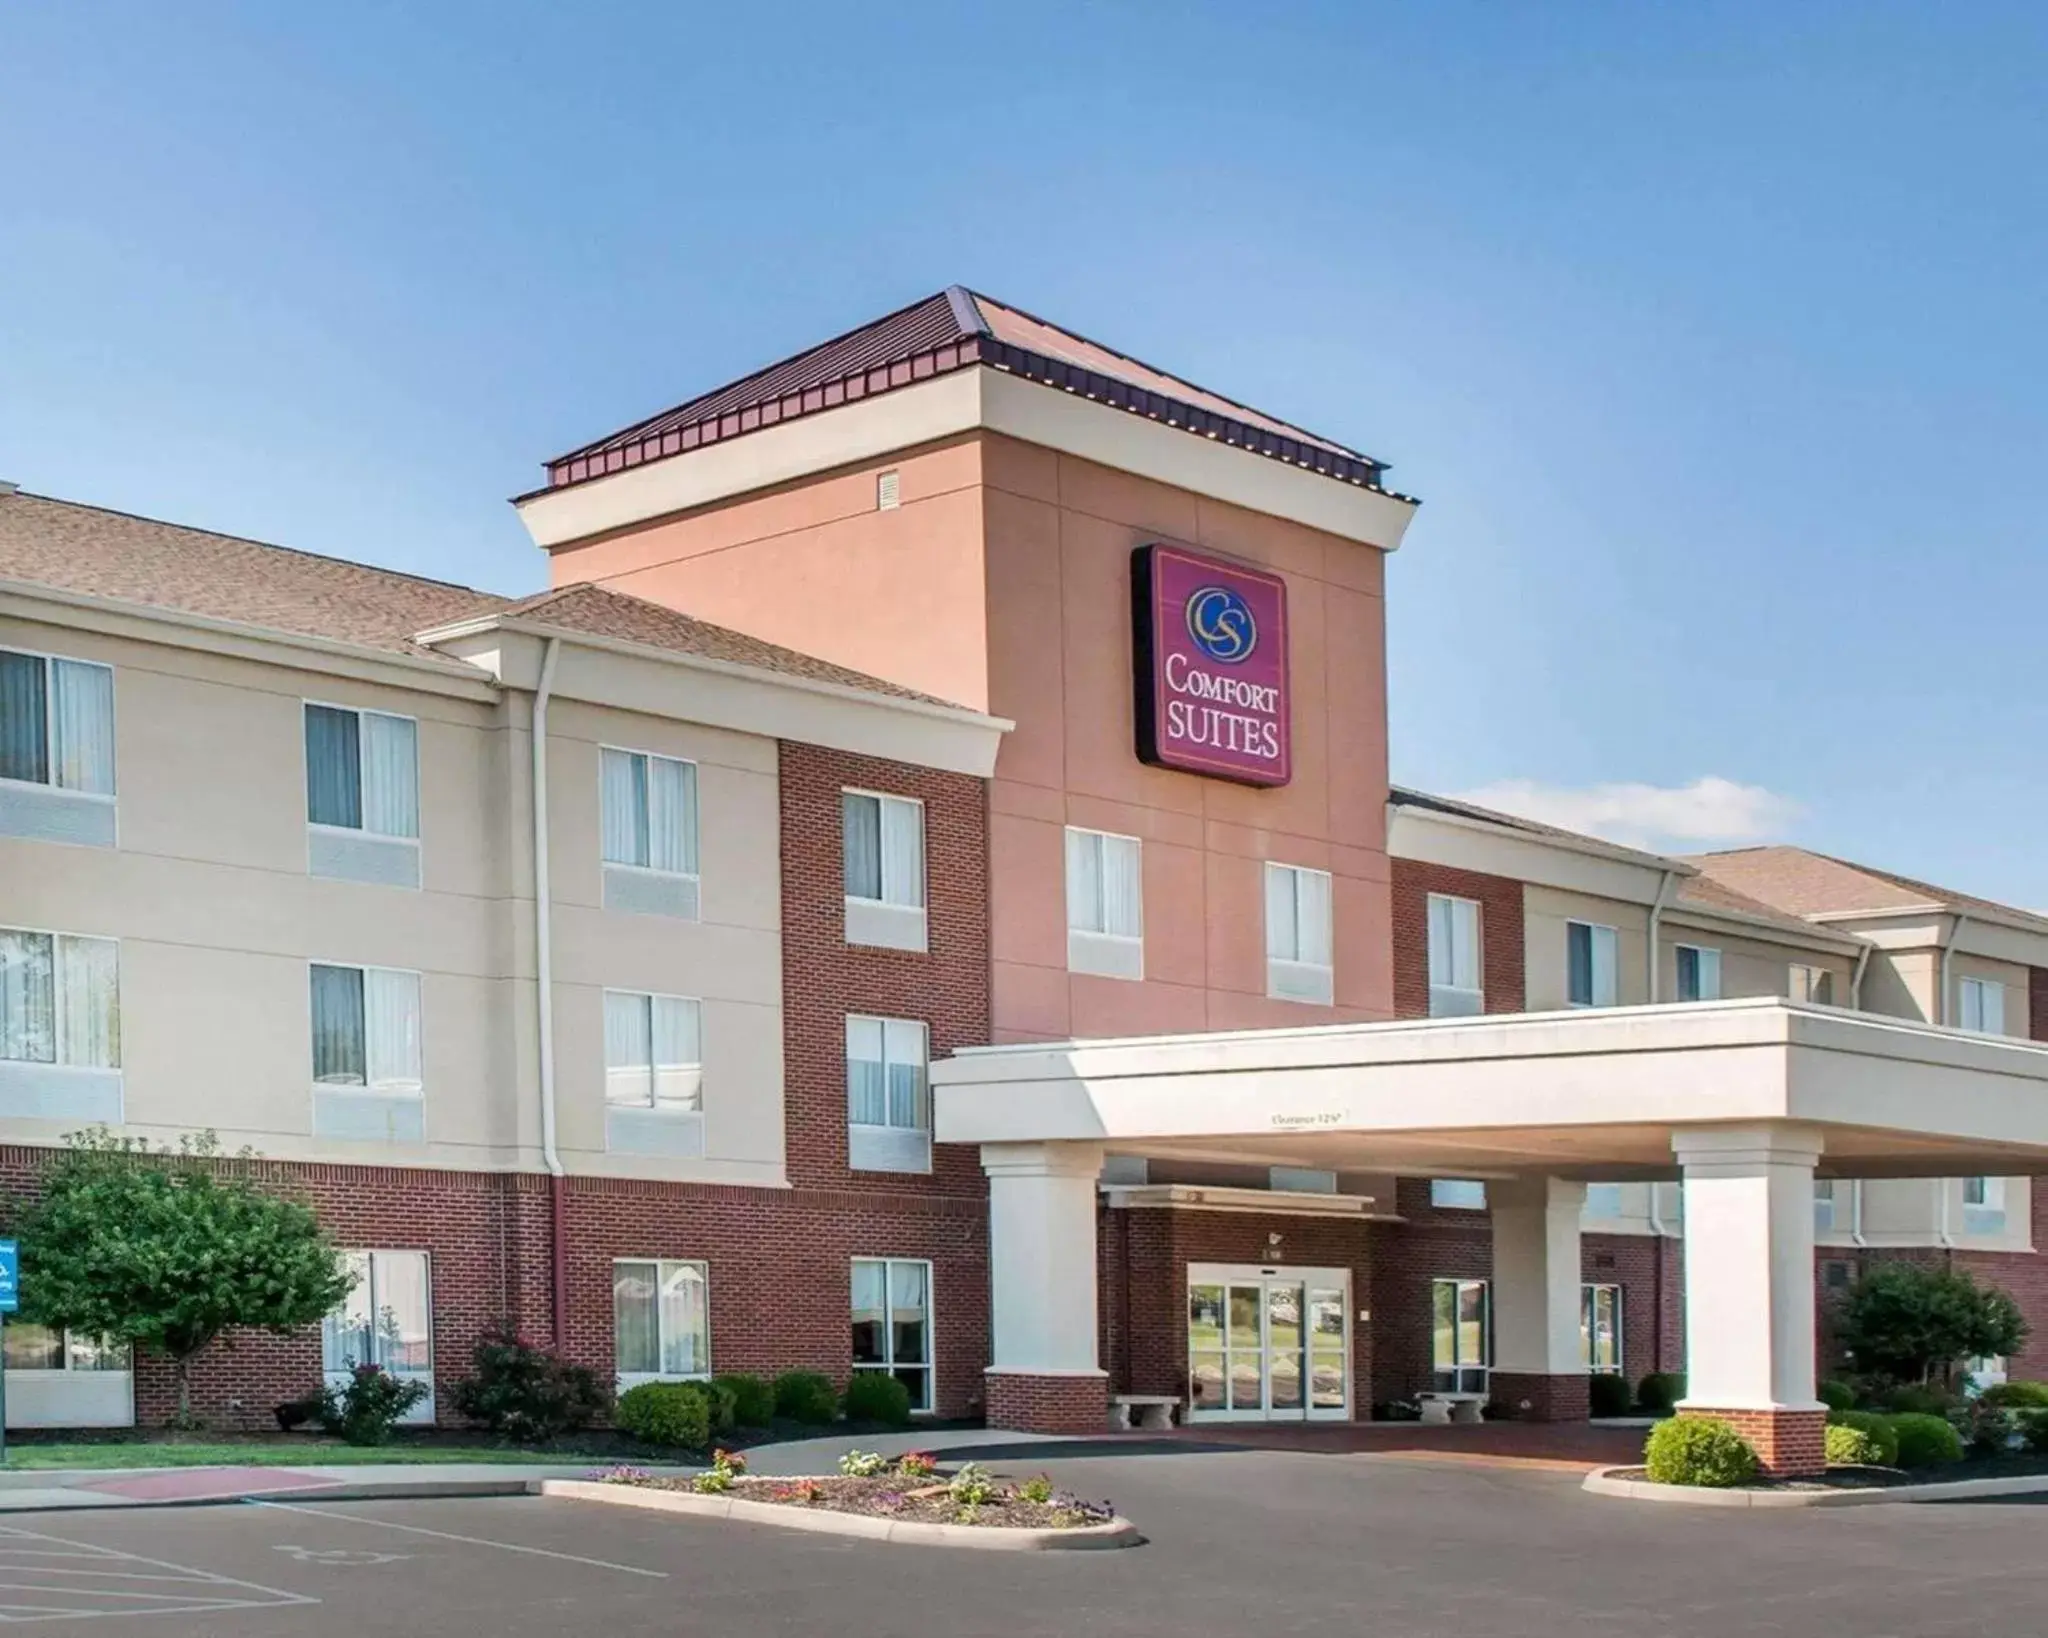 Property building in Comfort Suites French Lick